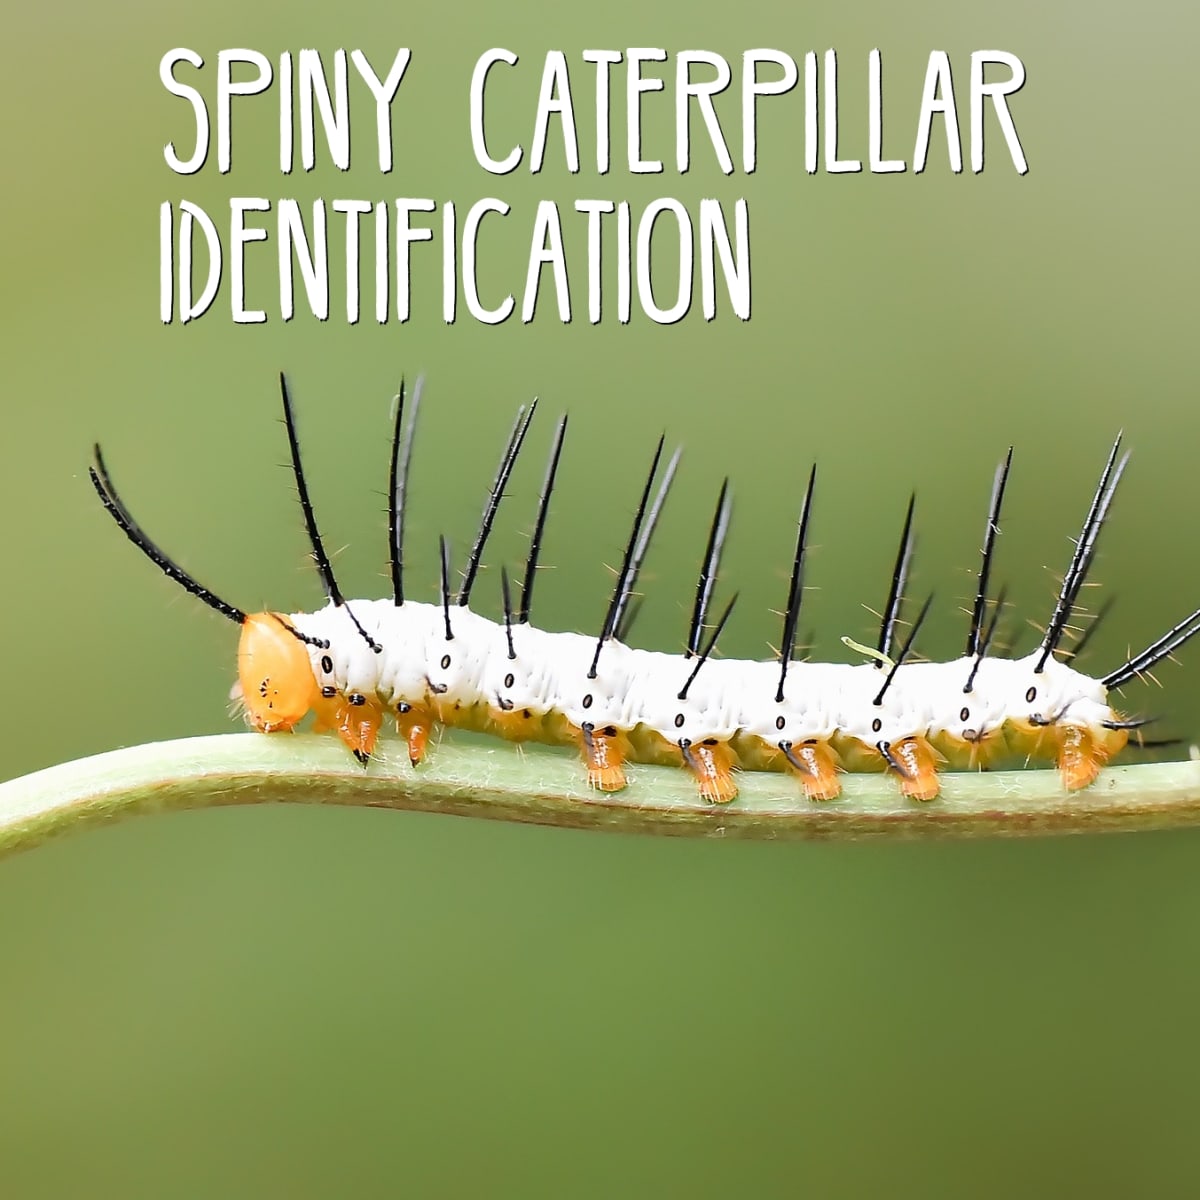 Caterpillars With Spines: A Quick and Easy Guide (With Photos ...